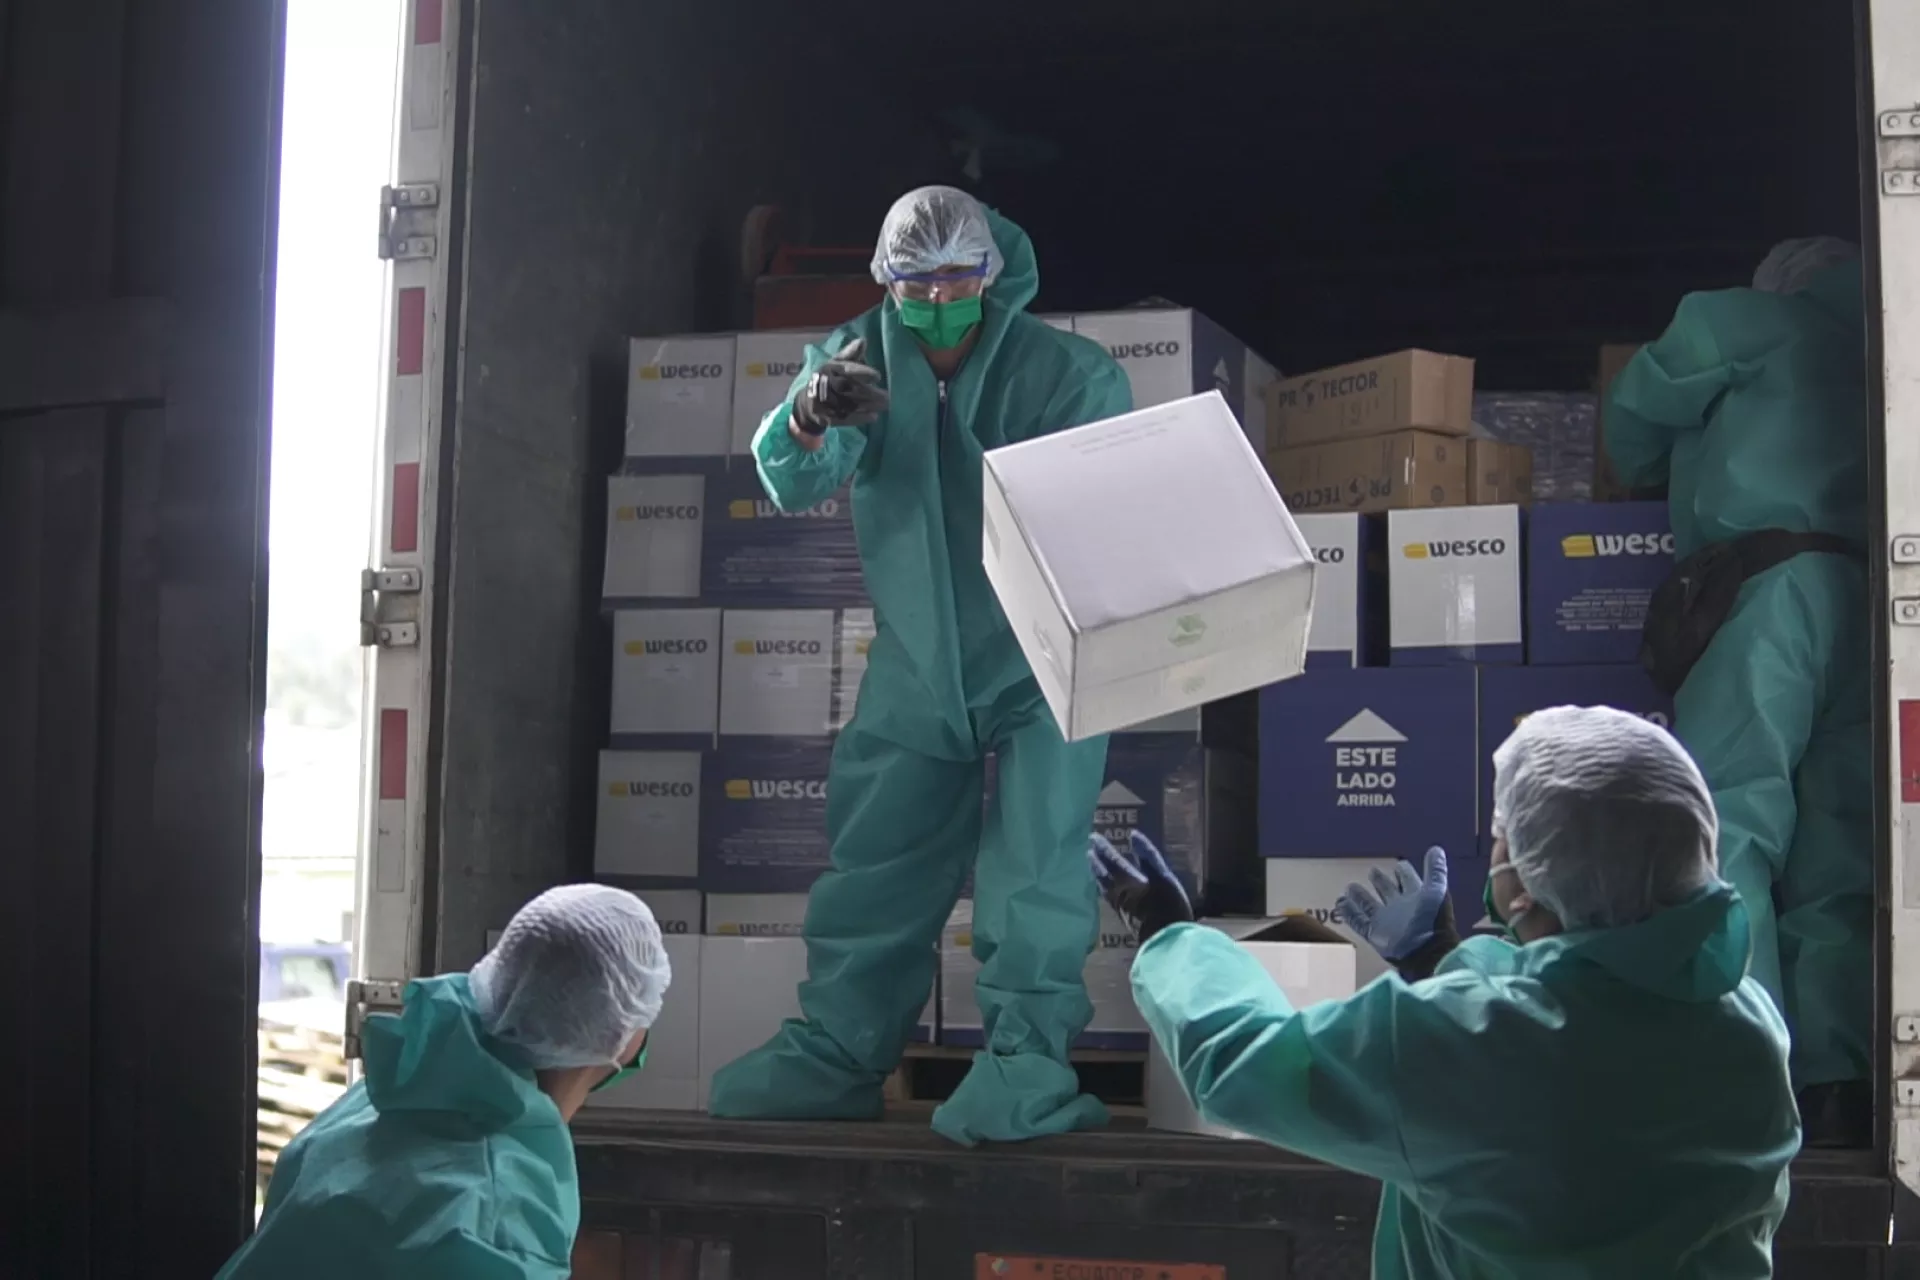 Liquide and gel alcohol supplies are delivered to the Ministry of Economic and Social Inclusion (MIES) to serve the children and adolescents benefiting from the foster care service in Quito, Ecuador.